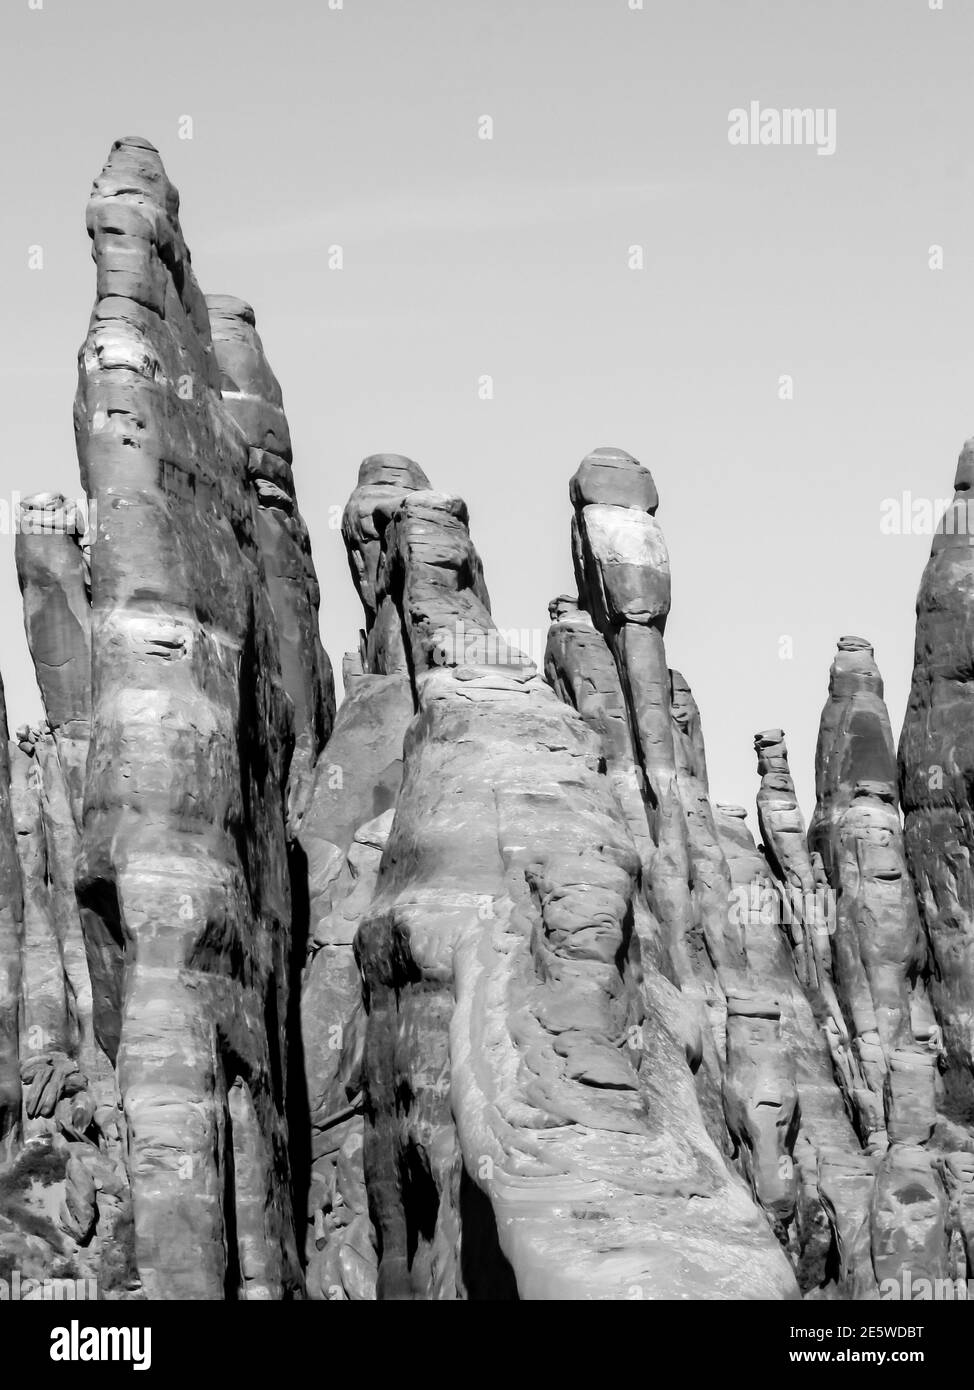 Delicate Sandstone spires in the Devil’s garden section of Arches National Park, Utah, USA, in black and white Stock Photo